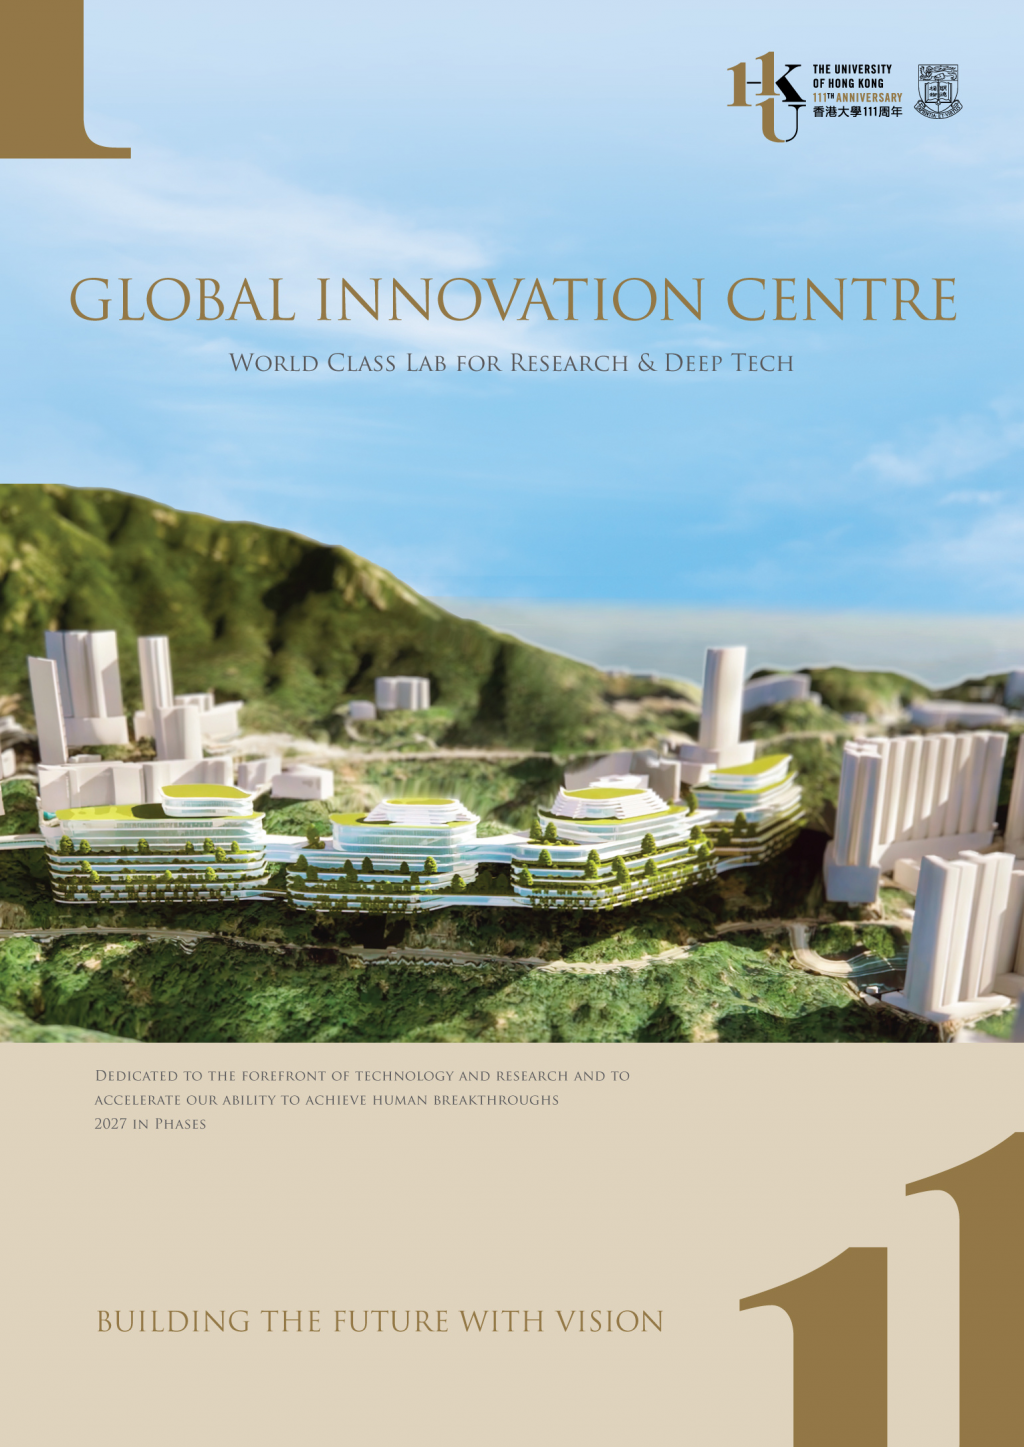 Global Innovation Centre - World Class Lab for Research & Deep Tech